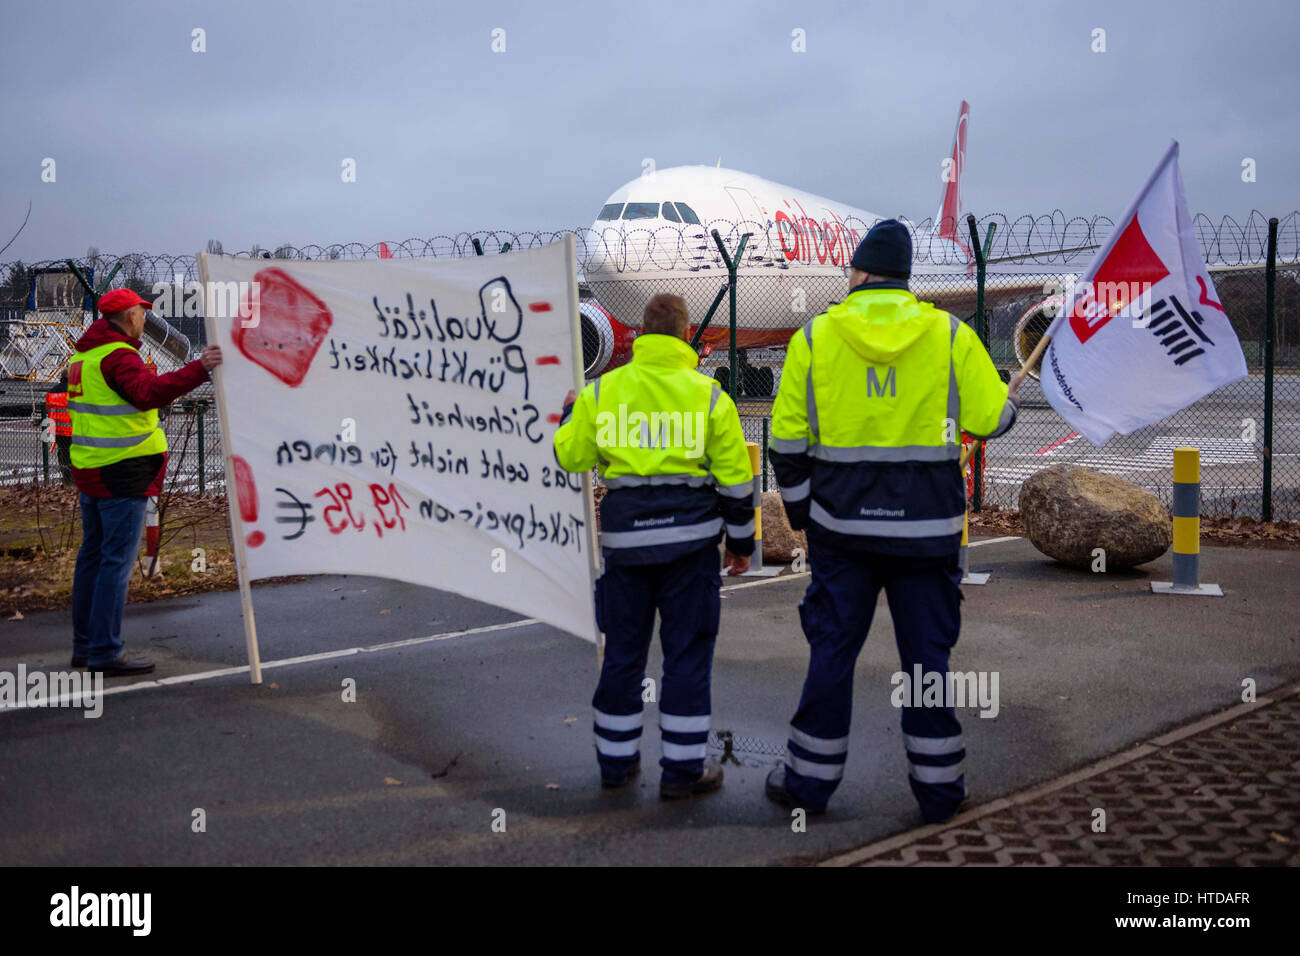 Ground staff hold up flags and a banner near the runway at Tegel Airport in Berlin, Germany, 10 March 2017. German trade union Verdi had called on some 2,000 ground staff to join the strike. The strike began on 10 March 2017 at 03:00 GMT and is to end on 11 March 2017 at 04:00 GMT. The main reason for the strike is the ongoing labour dispute between Verdi and the Forum of Ground Transport Service Providers in which the companies operating at the airports are organized. The trade union is demanding a pay rise for ground staff. Photo: Gregor Fischer/dpa Stock Photo